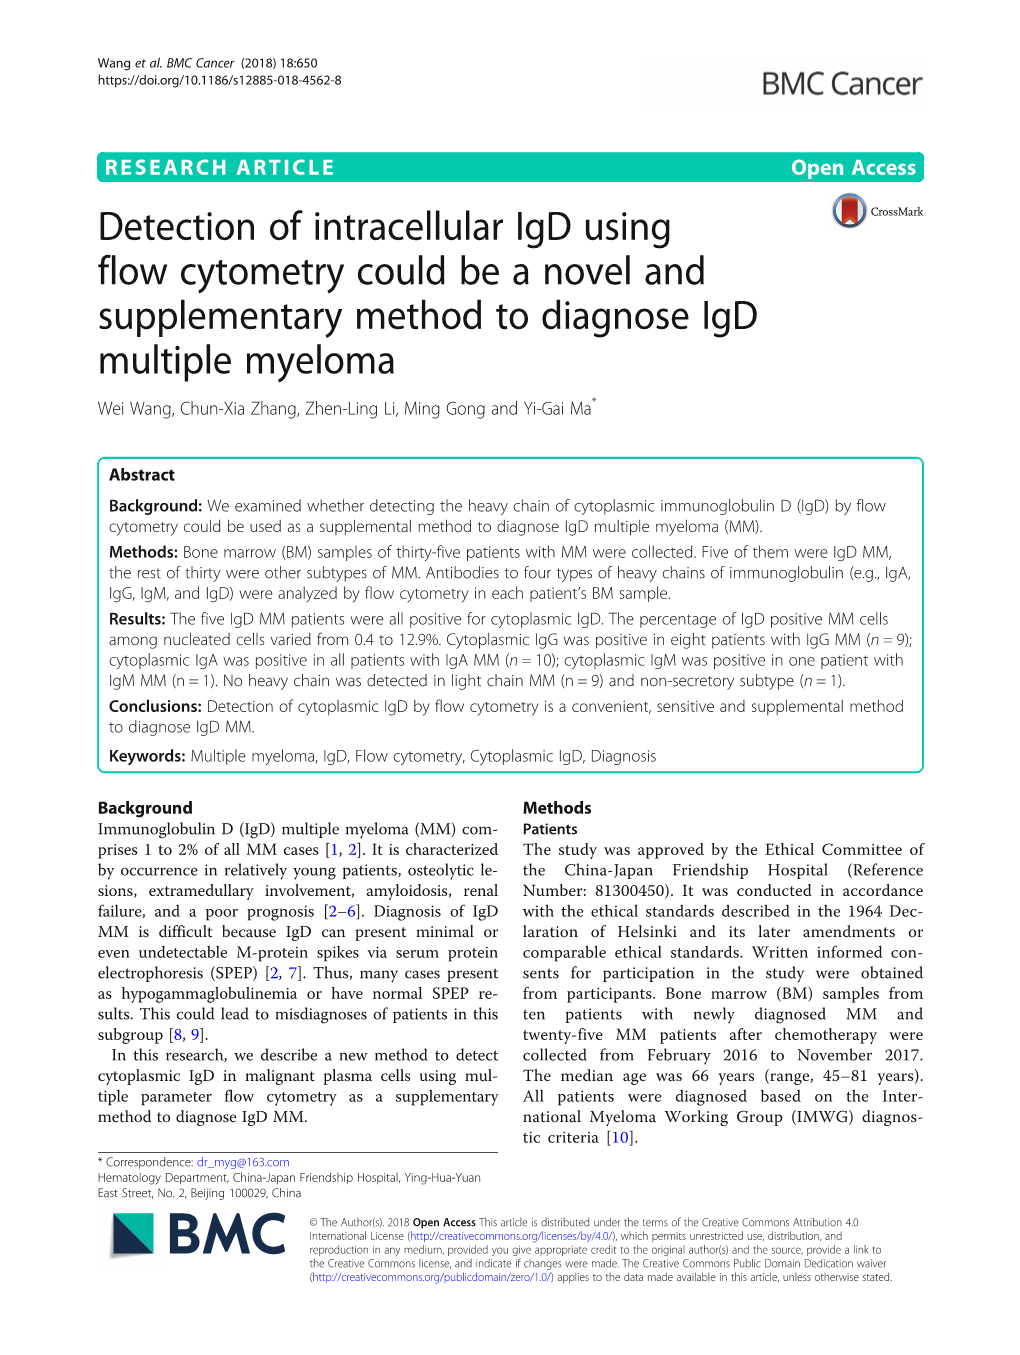 Detection of Intracellular Igd Using Flow Cytometry Could Be a Novel And